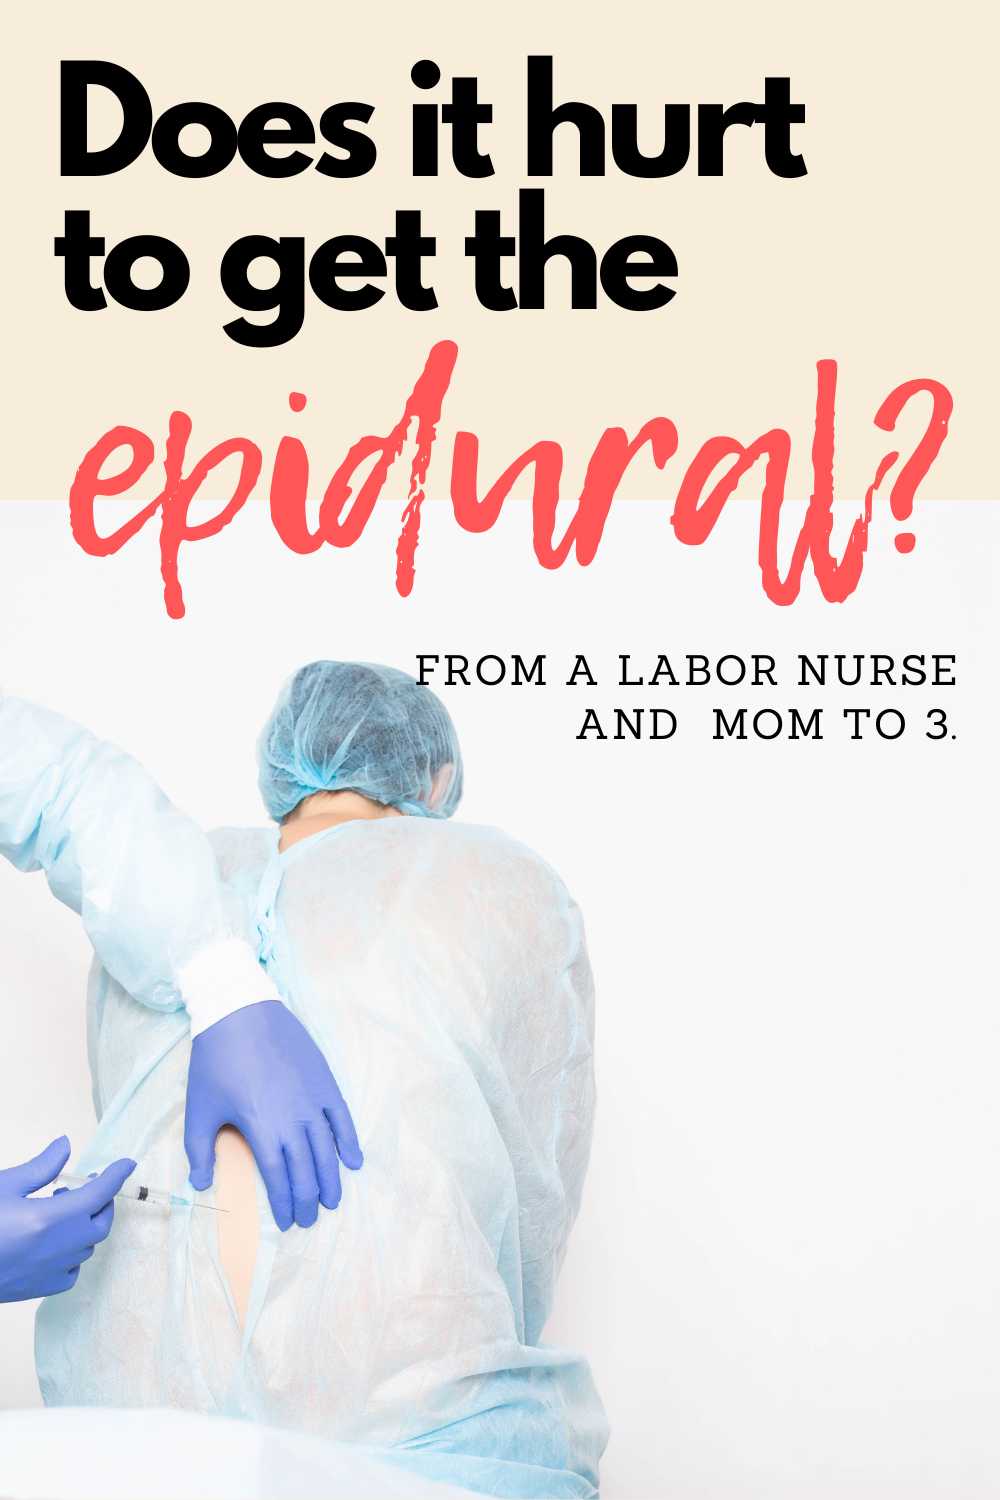 Uncover the reality of getting an epidural during childbirth. From procedure details to potential risks, and even how it compares to the pain of labor. Join the Pregnancy Nurse as she dives into her 20 years of nursing experience to answer your burning questions.